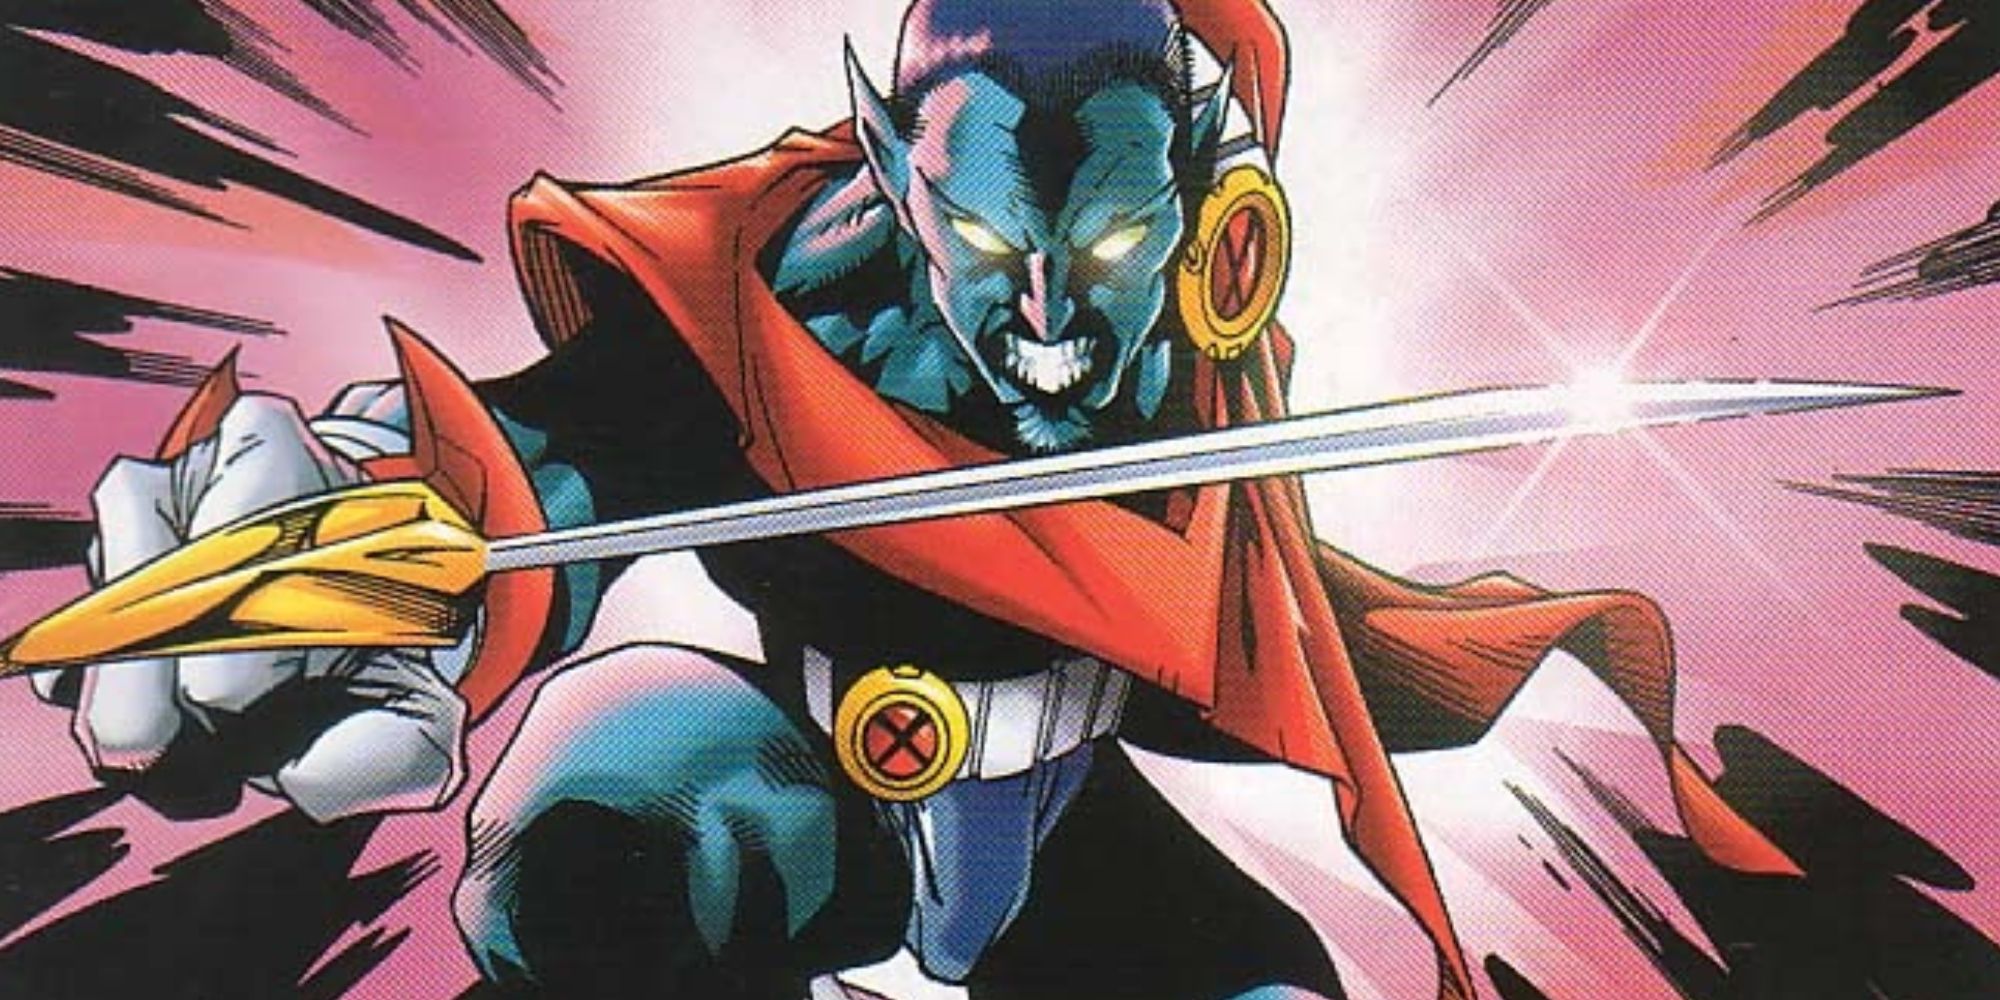 Nightcrawler brandishes a sword on the cover of Excalibur #98.